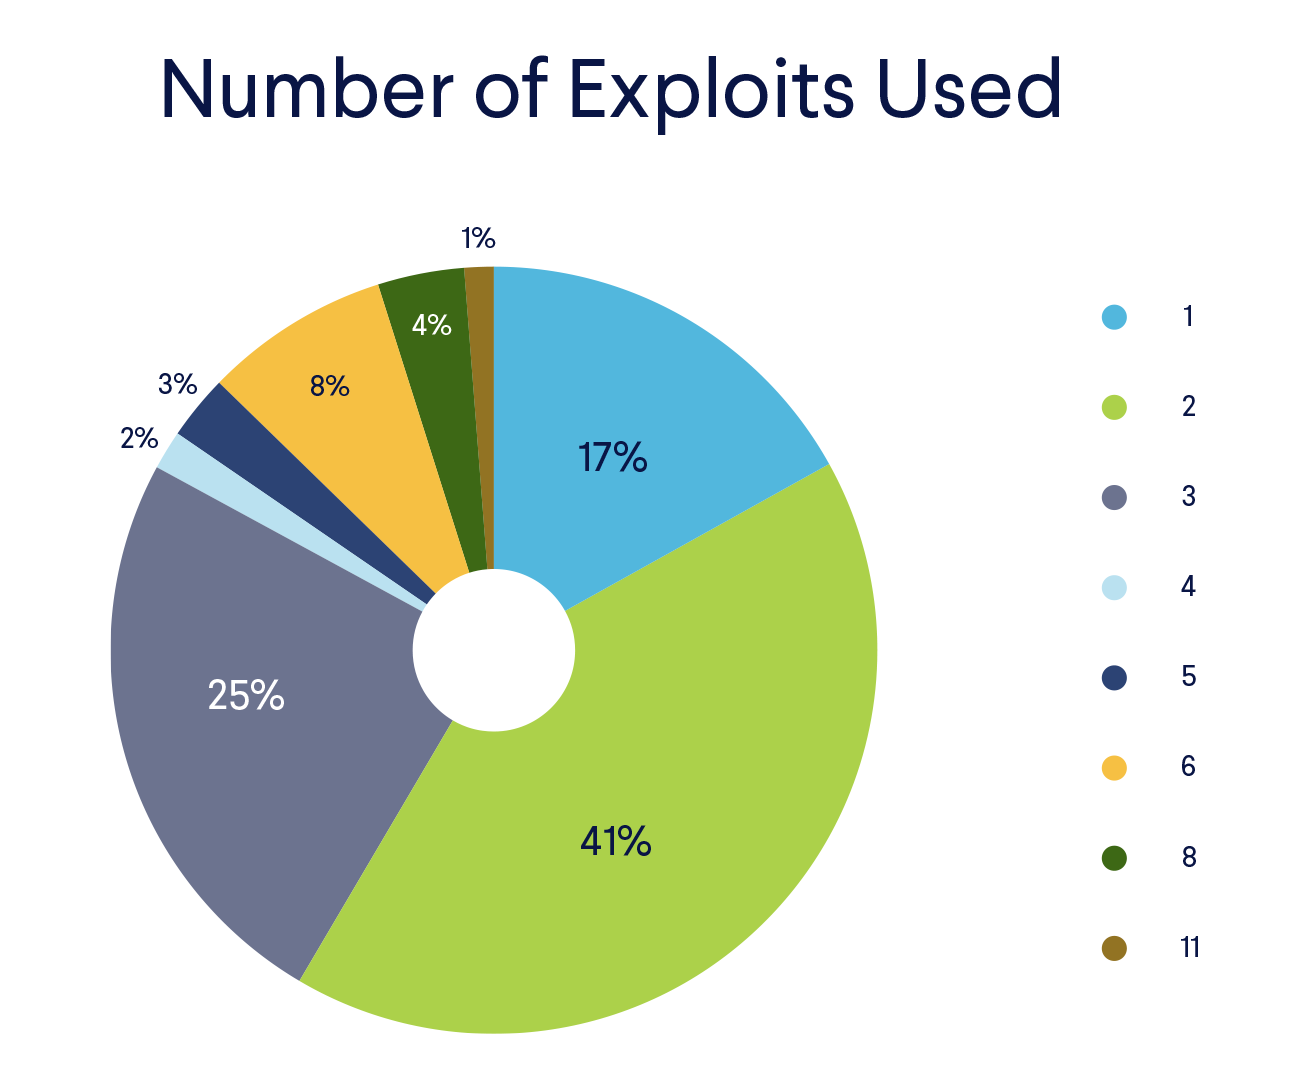 Most often IoT malware uses not one, but two or three exploits. Some use up to eleven.